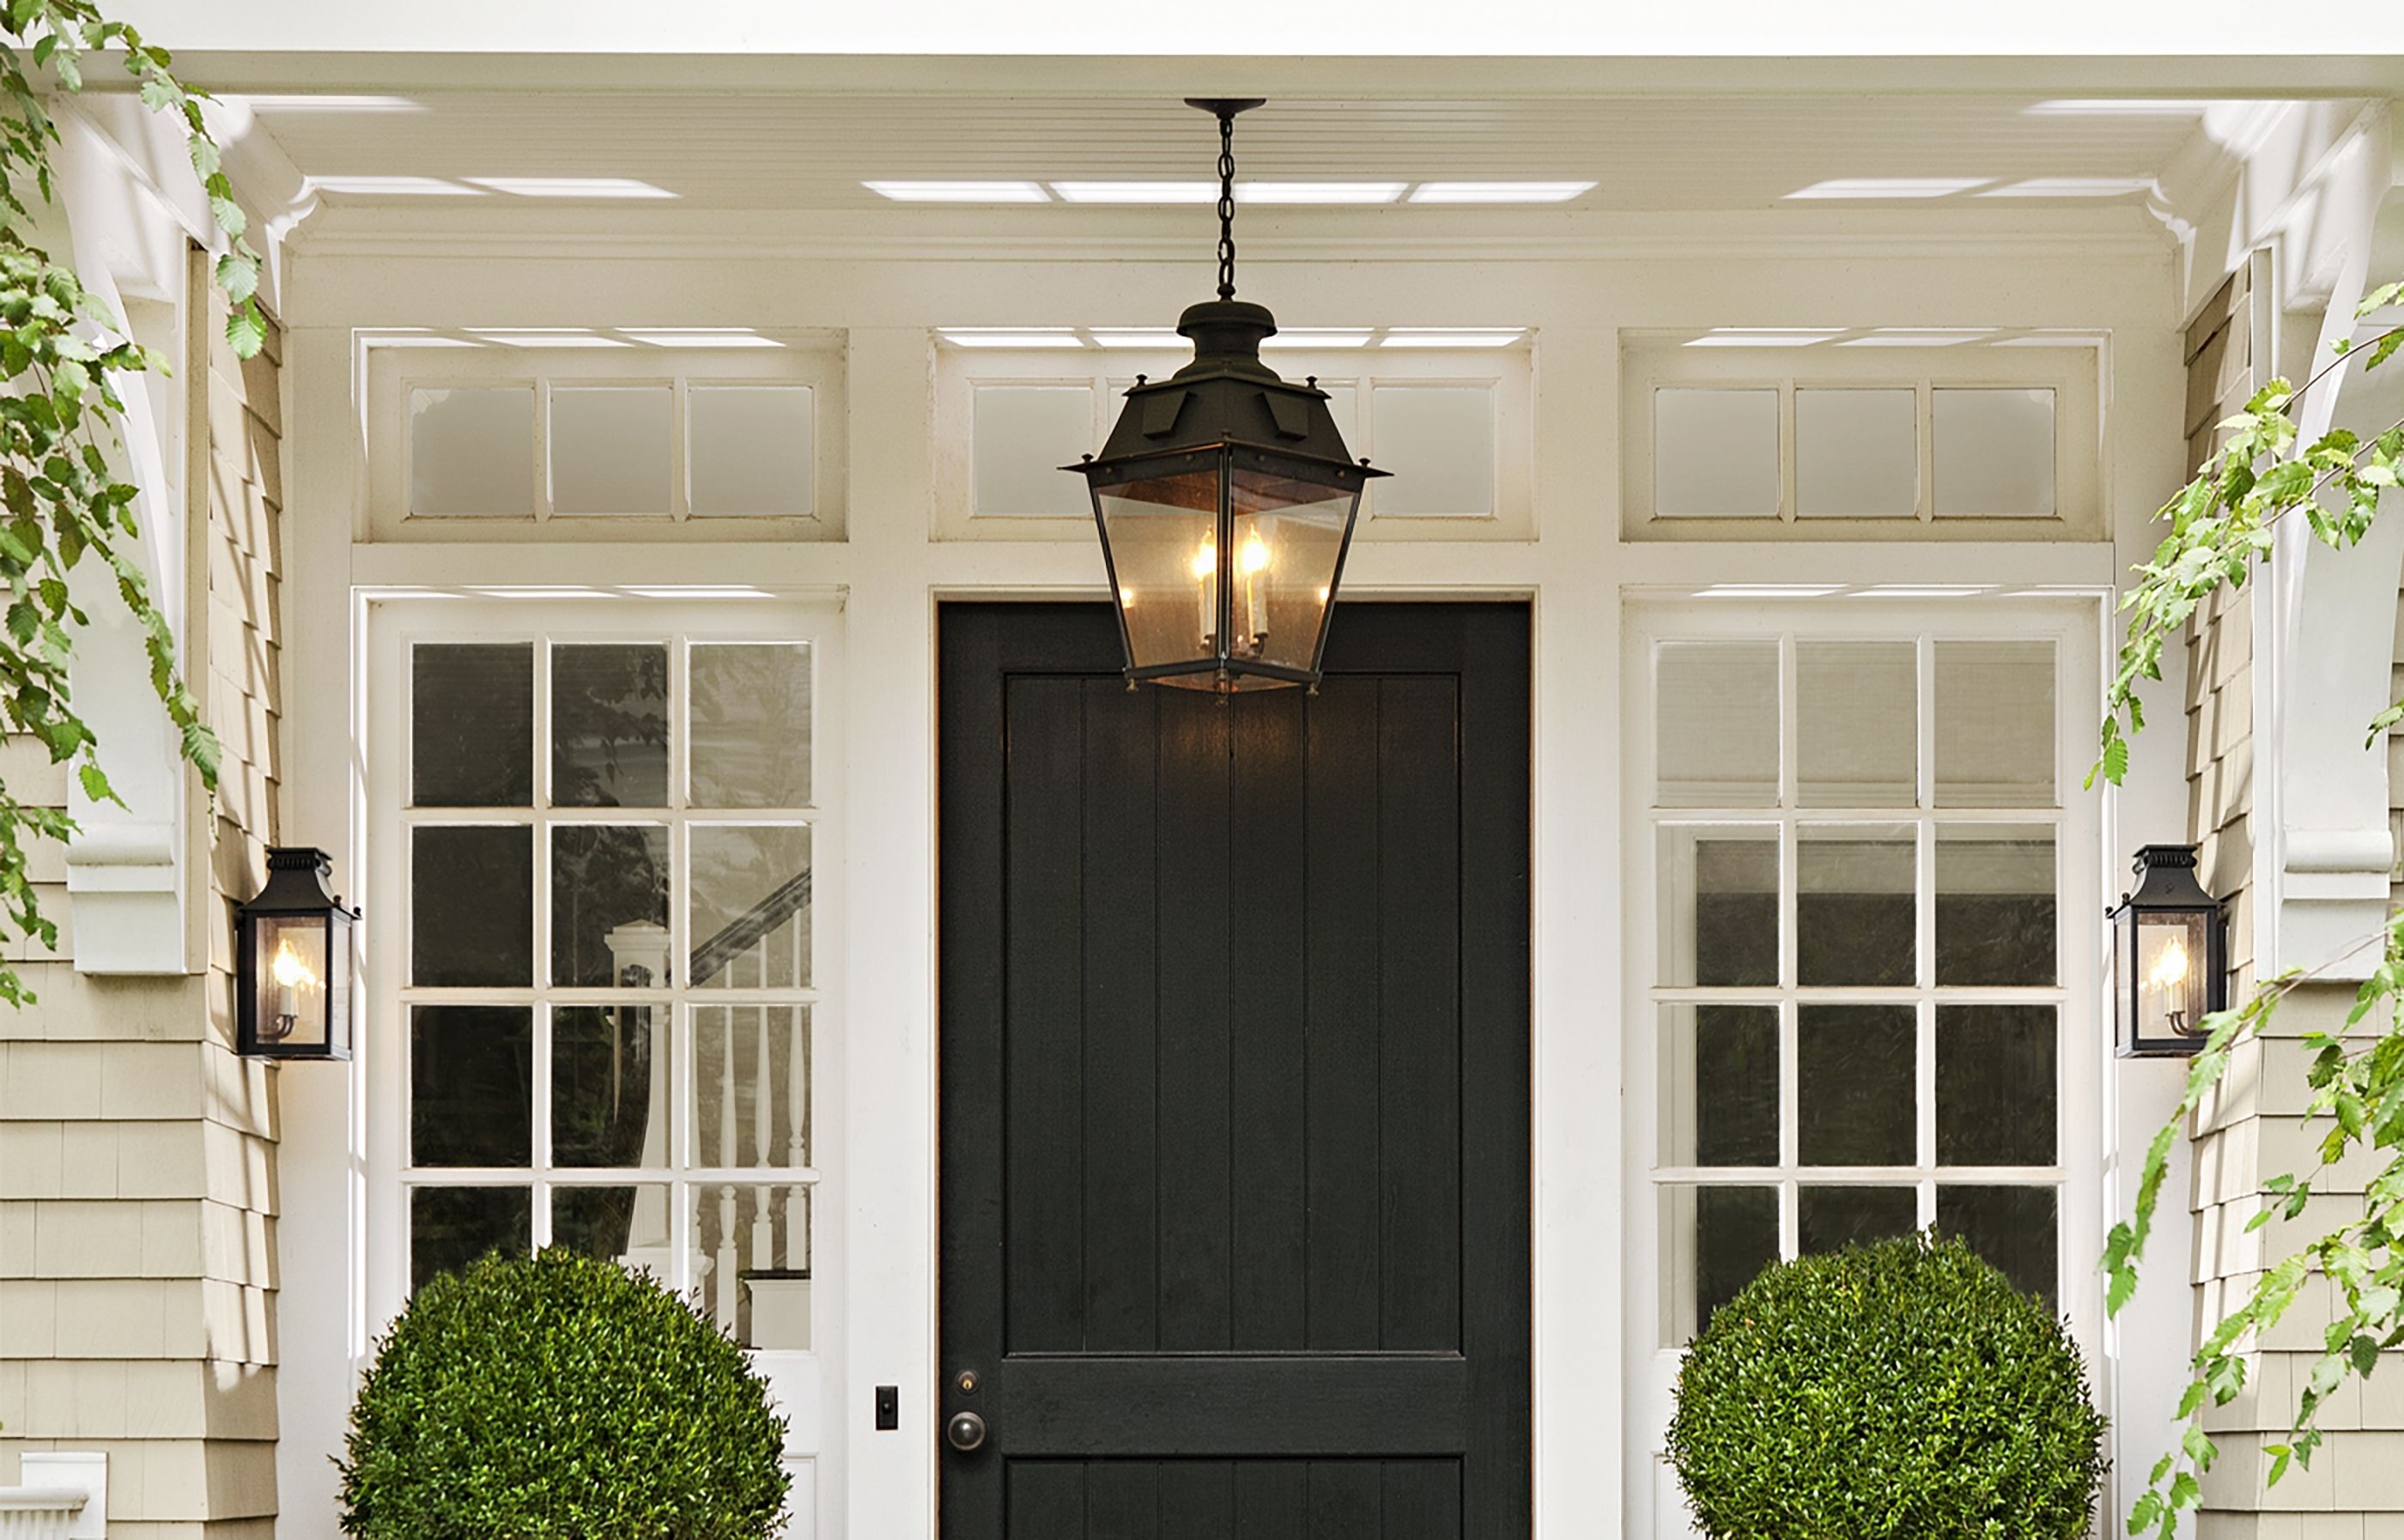 Front Porch Light Fixtures Ceiling Lowes – Teamns Throughout Outdoor Front Porch Ceiling Lights (View 14 of 15)